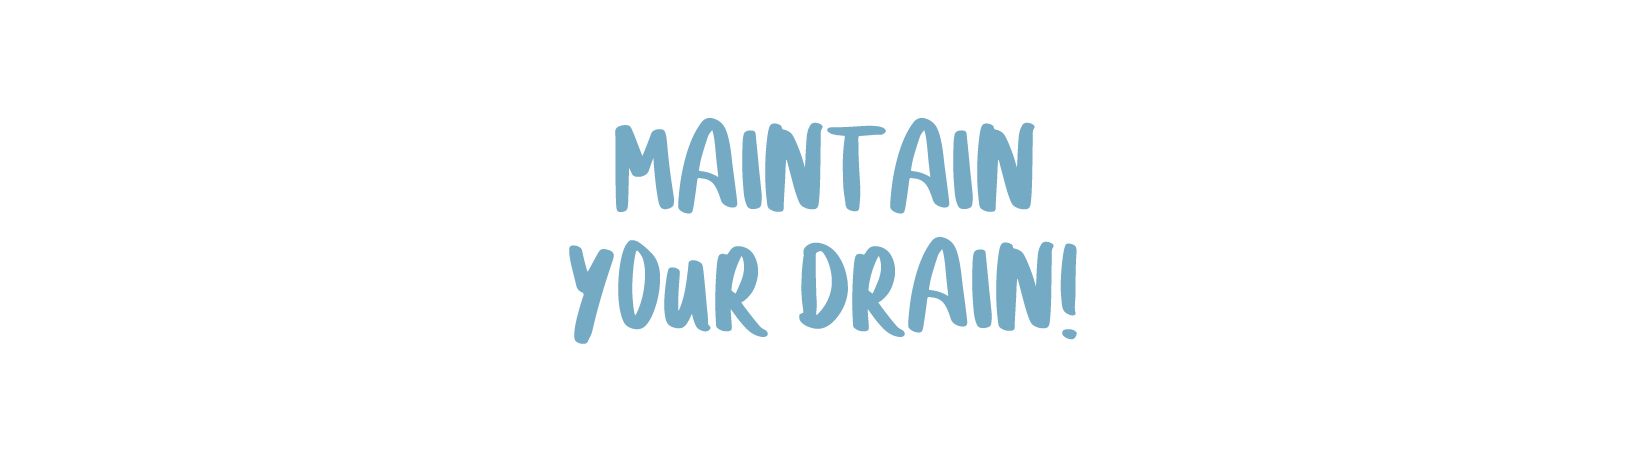 Maintain your drain banner